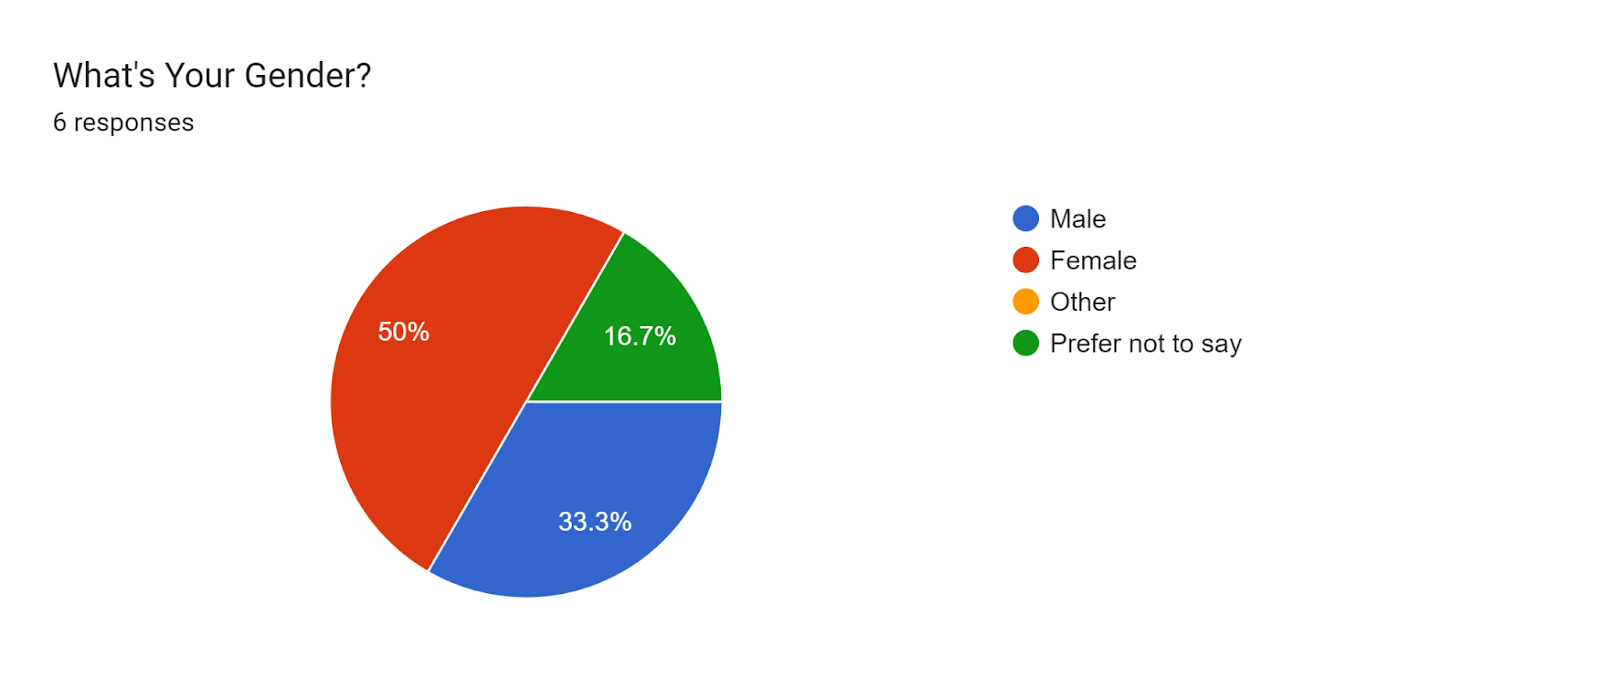 Forms response chart. Question title: What's Your Gender?. Number of responses: 6 responses.